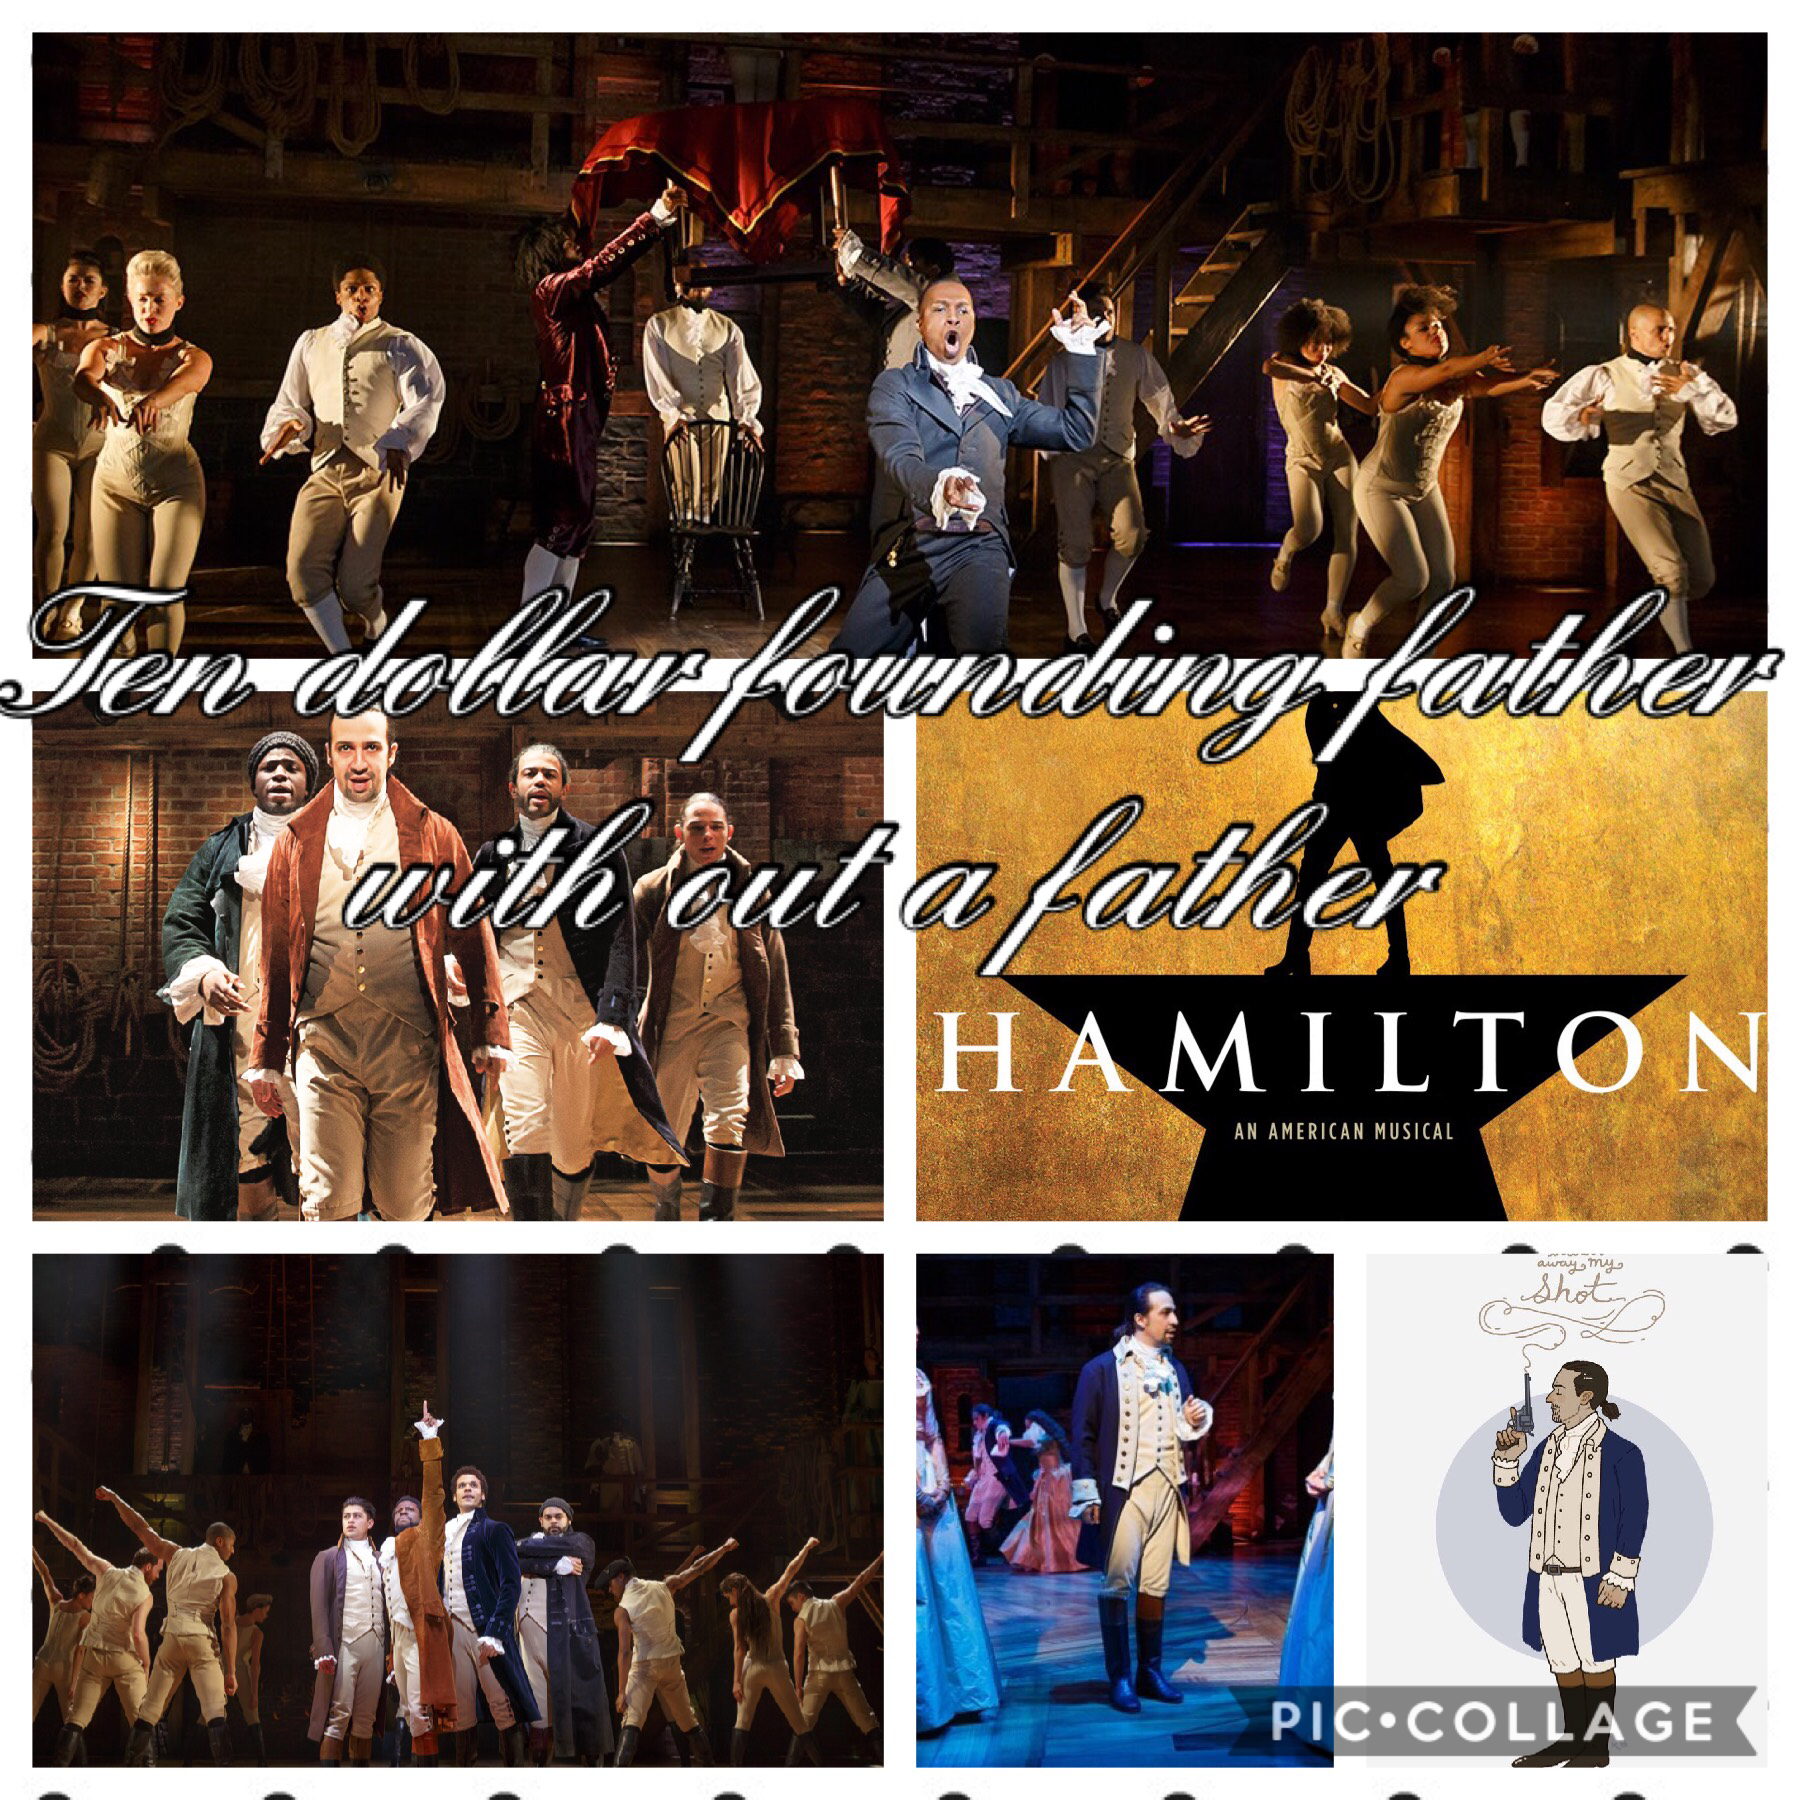 Who else loves Hamilton?!?! I love the play “ I am not throwing away my shot”